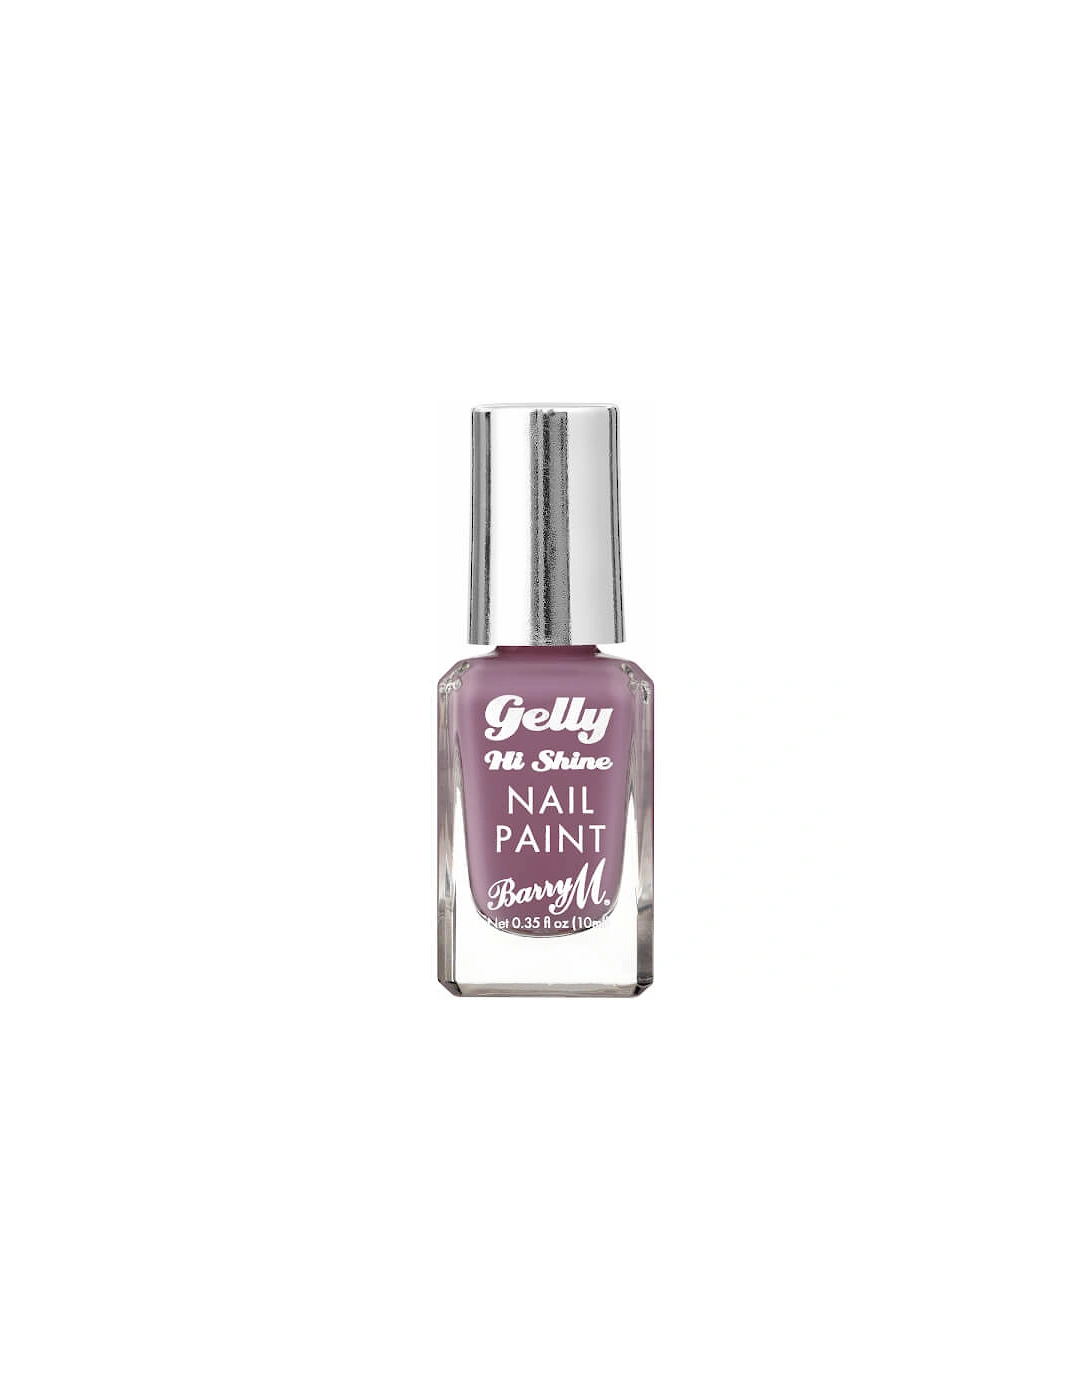 Gelly Nail Paint - Hibiscus, 2 of 1